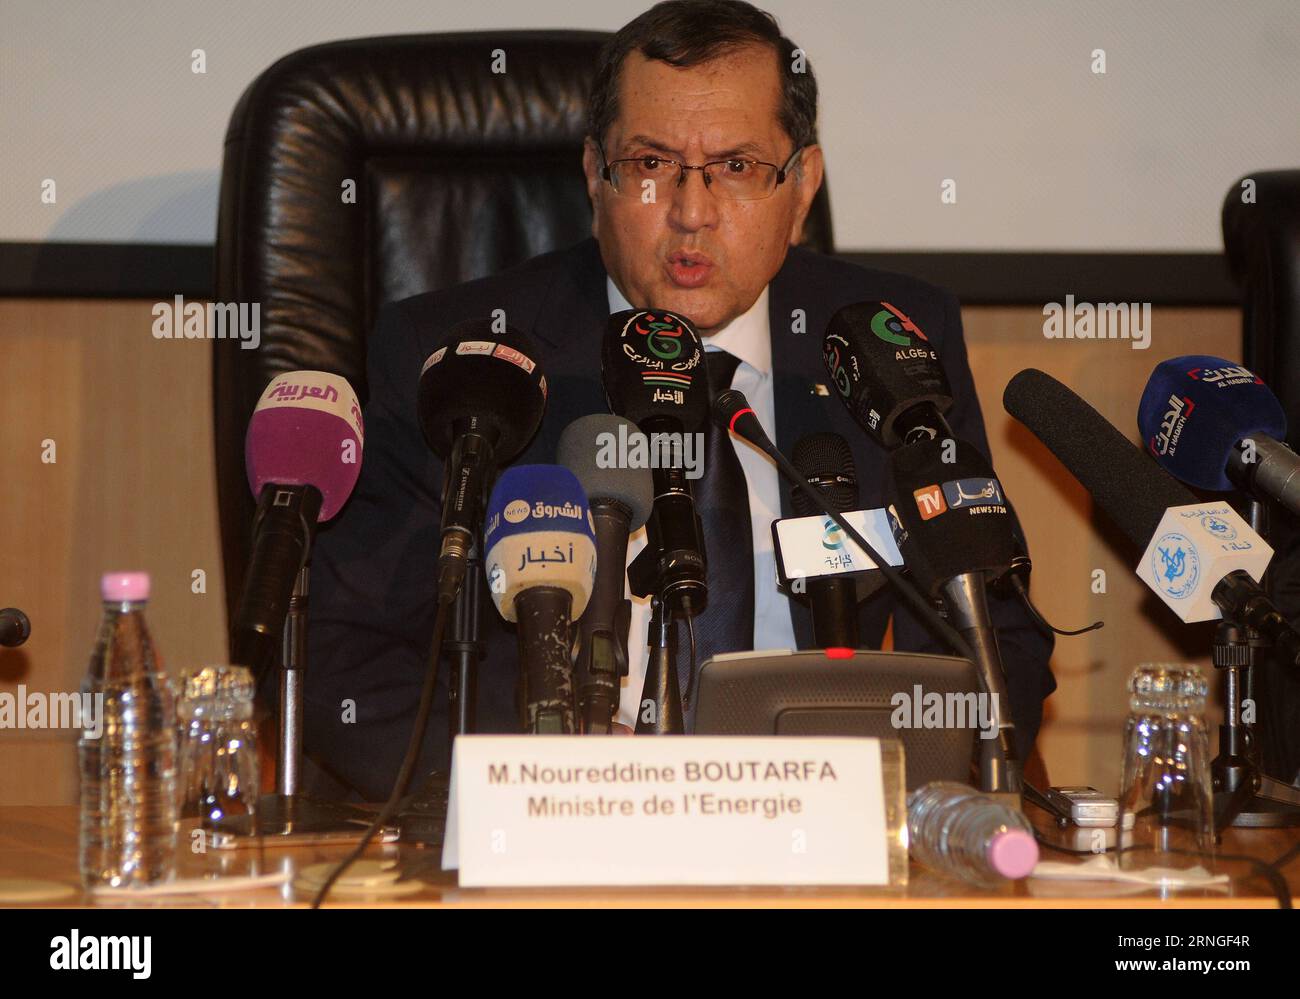 Algerian Energy Minister Noureddine Bouterfa speaks during a press conference preceding the informal meeting of the Organization of the Petroleum Exporting Countries (OPEC) in Algiers, Algeria, on Sept. 25, 2016. Algeria on Sunday expressed optimism that an agreement could be reached by major oil producing countries to stabilize the world oil market. () (zf) ALGERIA-ALGIERS-ENERGY-OPEC Xinhua PUBLICATIONxNOTxINxCHN   Algerian Energy Ministers Noureddine  Speaks during a Press Conference preceding The Informal Meeting of The Organization of The Petroleum Exporting Countries OPEC in Algiers Alge Stock Photo